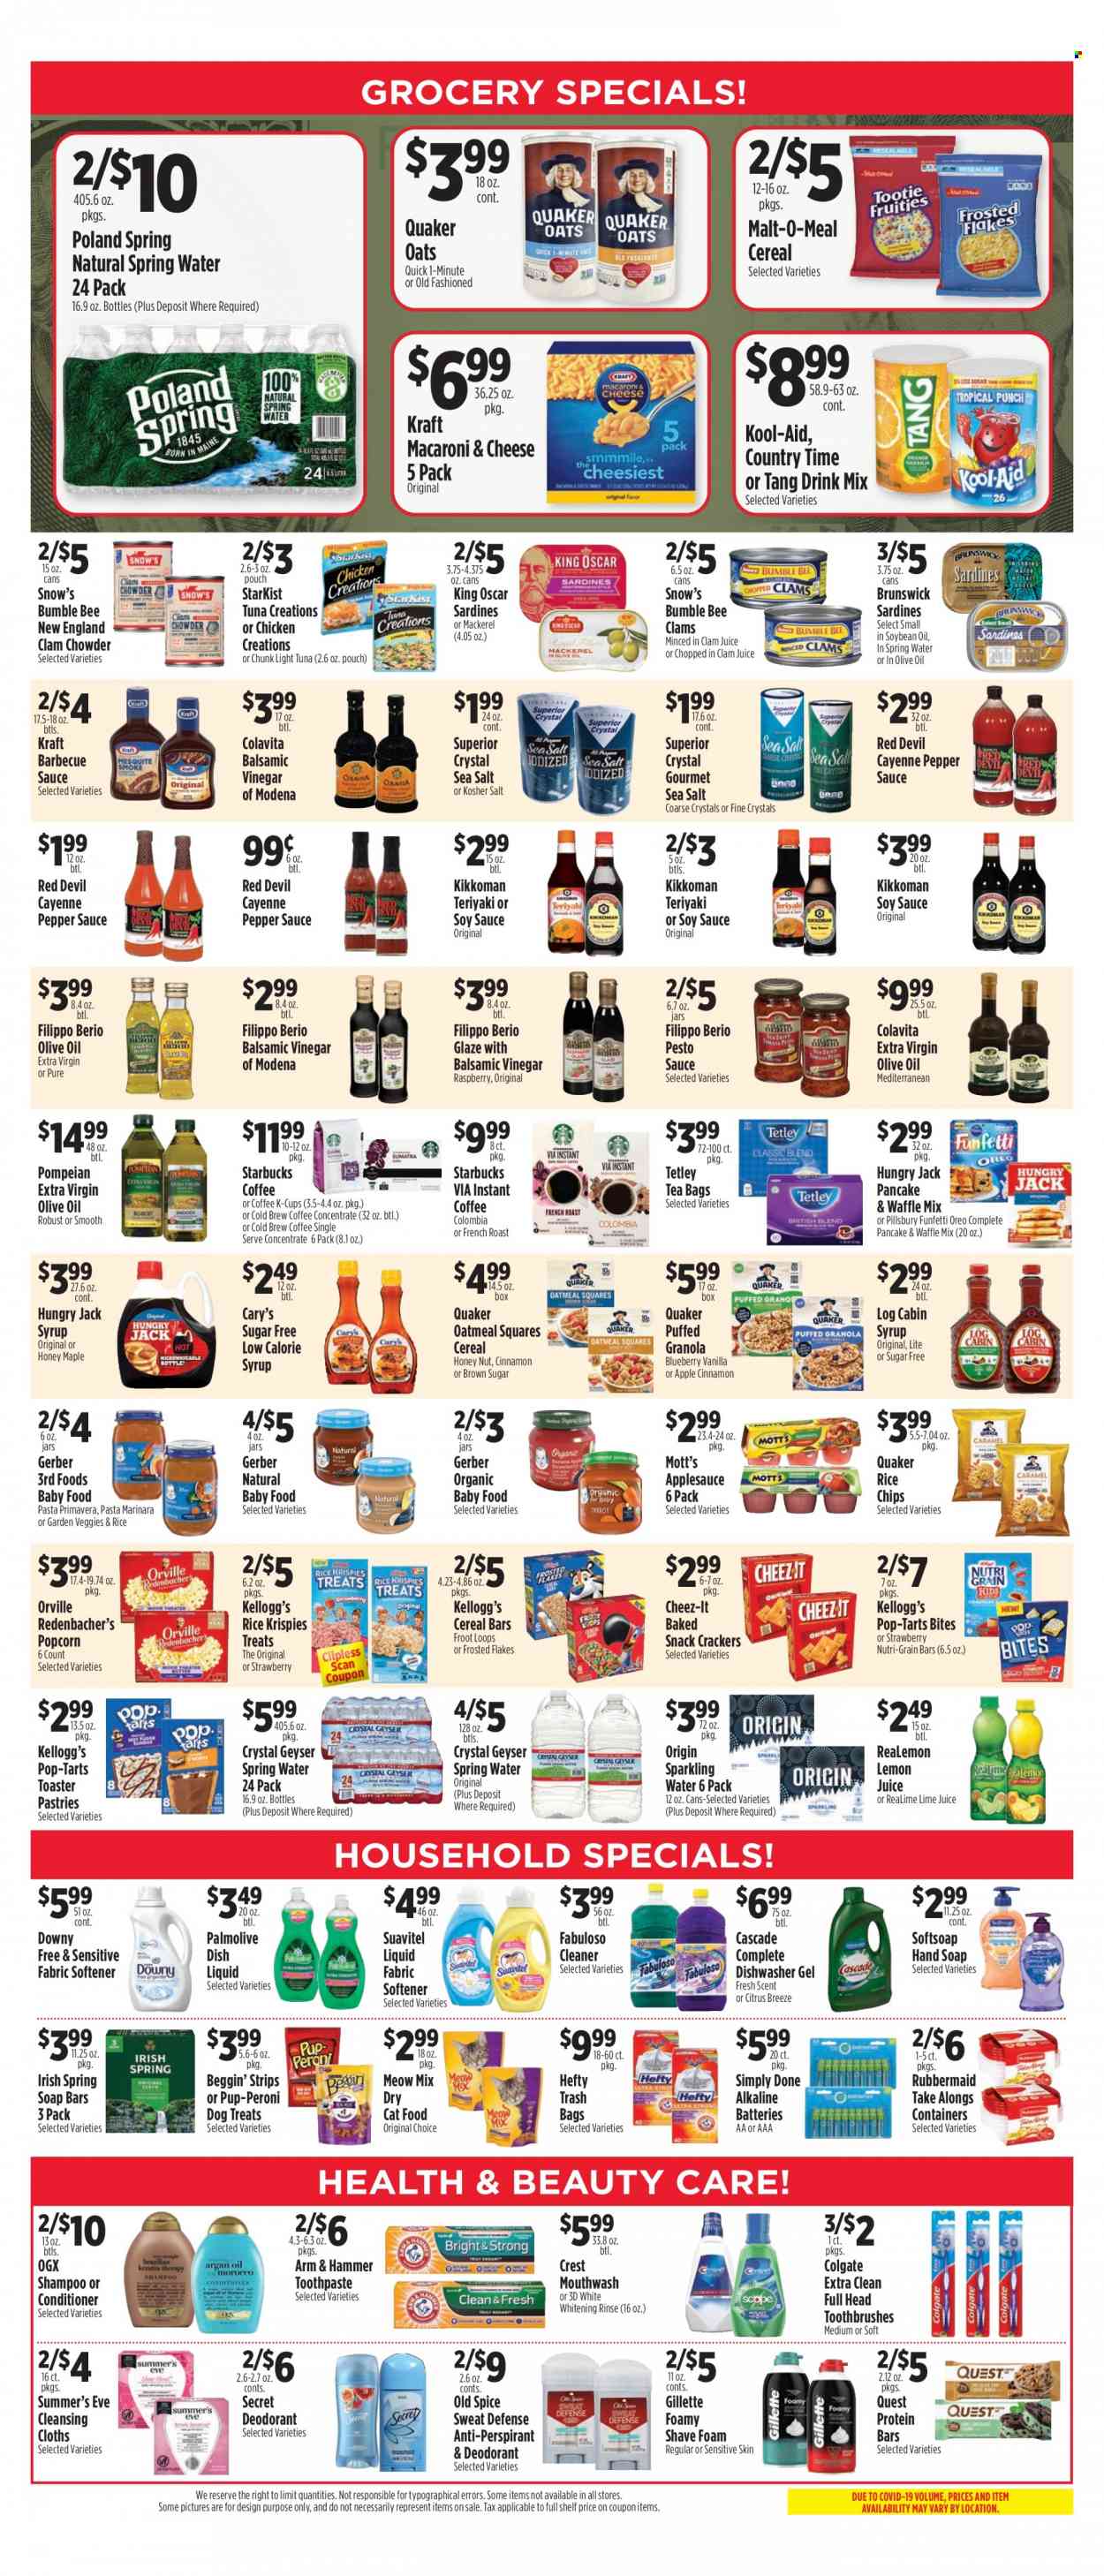 thumbnail - Pioneer Supermarkets Flyer - 11/27/2022 - 12/03/2022 - Sales products - Mott's, mackerel, sardines, StarKist, macaroni & cheese, pasta, Bumble Bee, sauce, pancakes, Pillsbury, Quaker, Kraft®, Oreo, strips, snack, cereal bar, crackers, Kellogg's, Pop-Tarts, Gerber, chips, popcorn, Cheez-It, ARM & HAMMER, oatmeal, oats, malt, light tuna, clam chowder, cereals, granola, protein bar, Rice Krispies, Frosted Flakes, Nutri-Grain, spice, cinnamon, BBQ sauce, soy sauce, pesto, Kikkoman, balsamic vinegar, extra virgin olive oil, soya oil, apple sauce, syrup, Country Time, spring water, sparkling water, lemon juice, tea bags, Starbucks, instant coffee, coffee capsules, K-Cups, organic baby food, cleaner, Fabuloso, Cascade, fabric softener, Downy Laundry, dishwashing liquid, shampoo, Softsoap, hand soap, Old Spice, Palmolive, soap, Colgate, toothpaste, mouthwash, Crest, conditioner, OGX, Gillette, Hefty. Page 3.